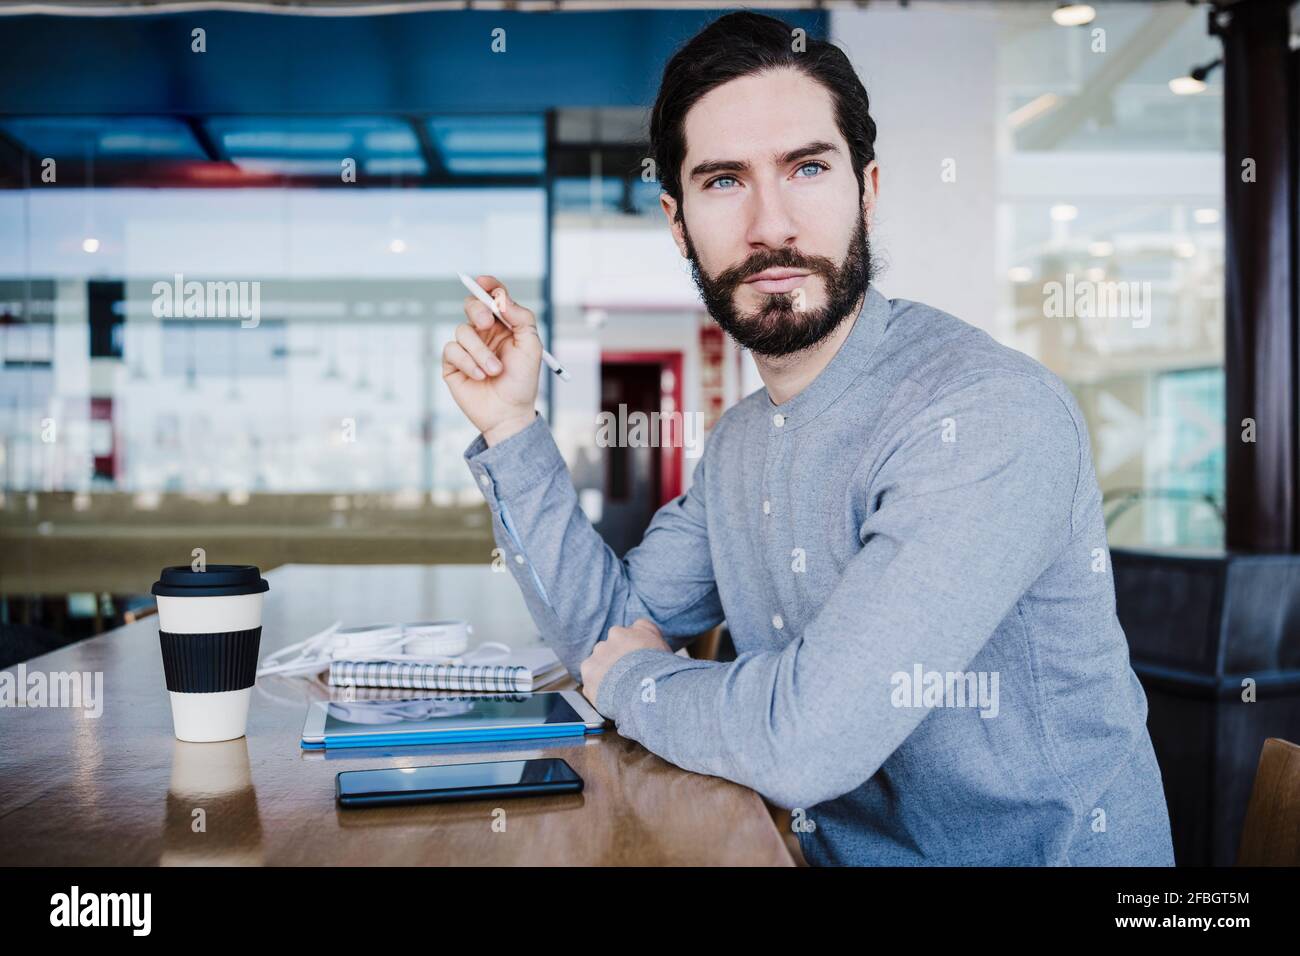 Thoughtful male businessperson looking away while sitting by desk at work place Stock Photo